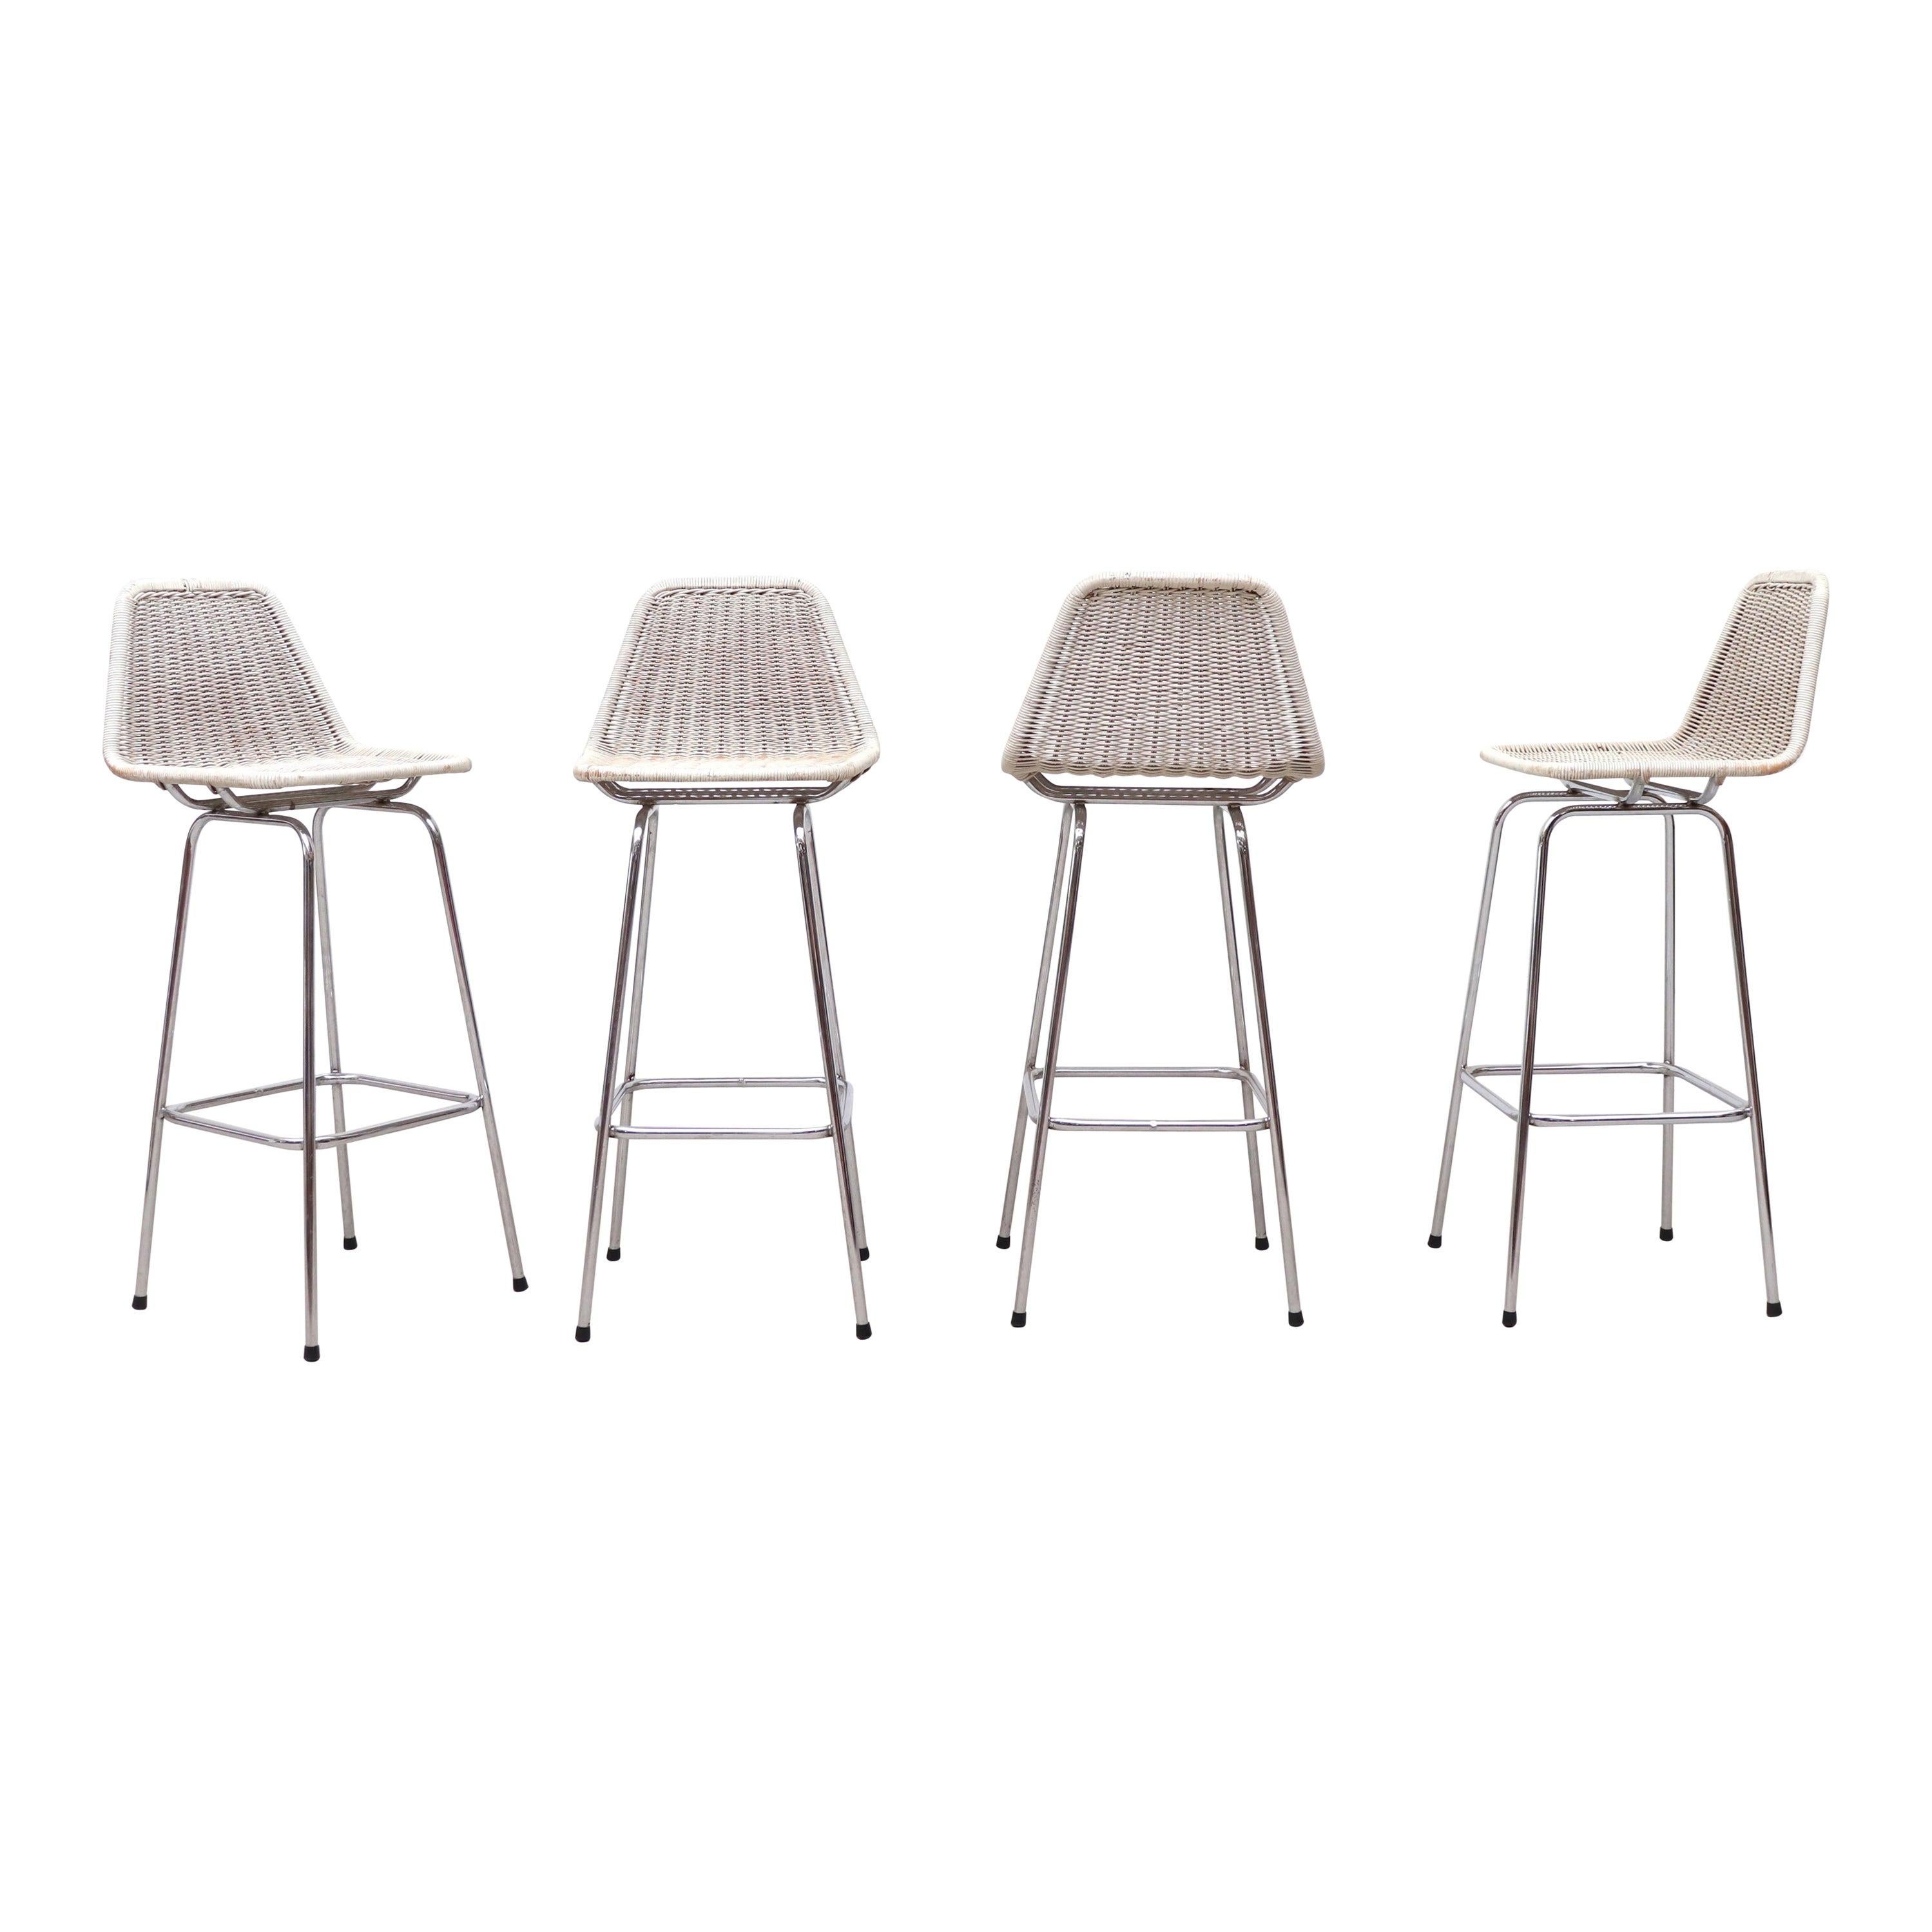 Set of 4 Charlotte Perriand Style Wicker Bar Height Stools with Chrome Legs